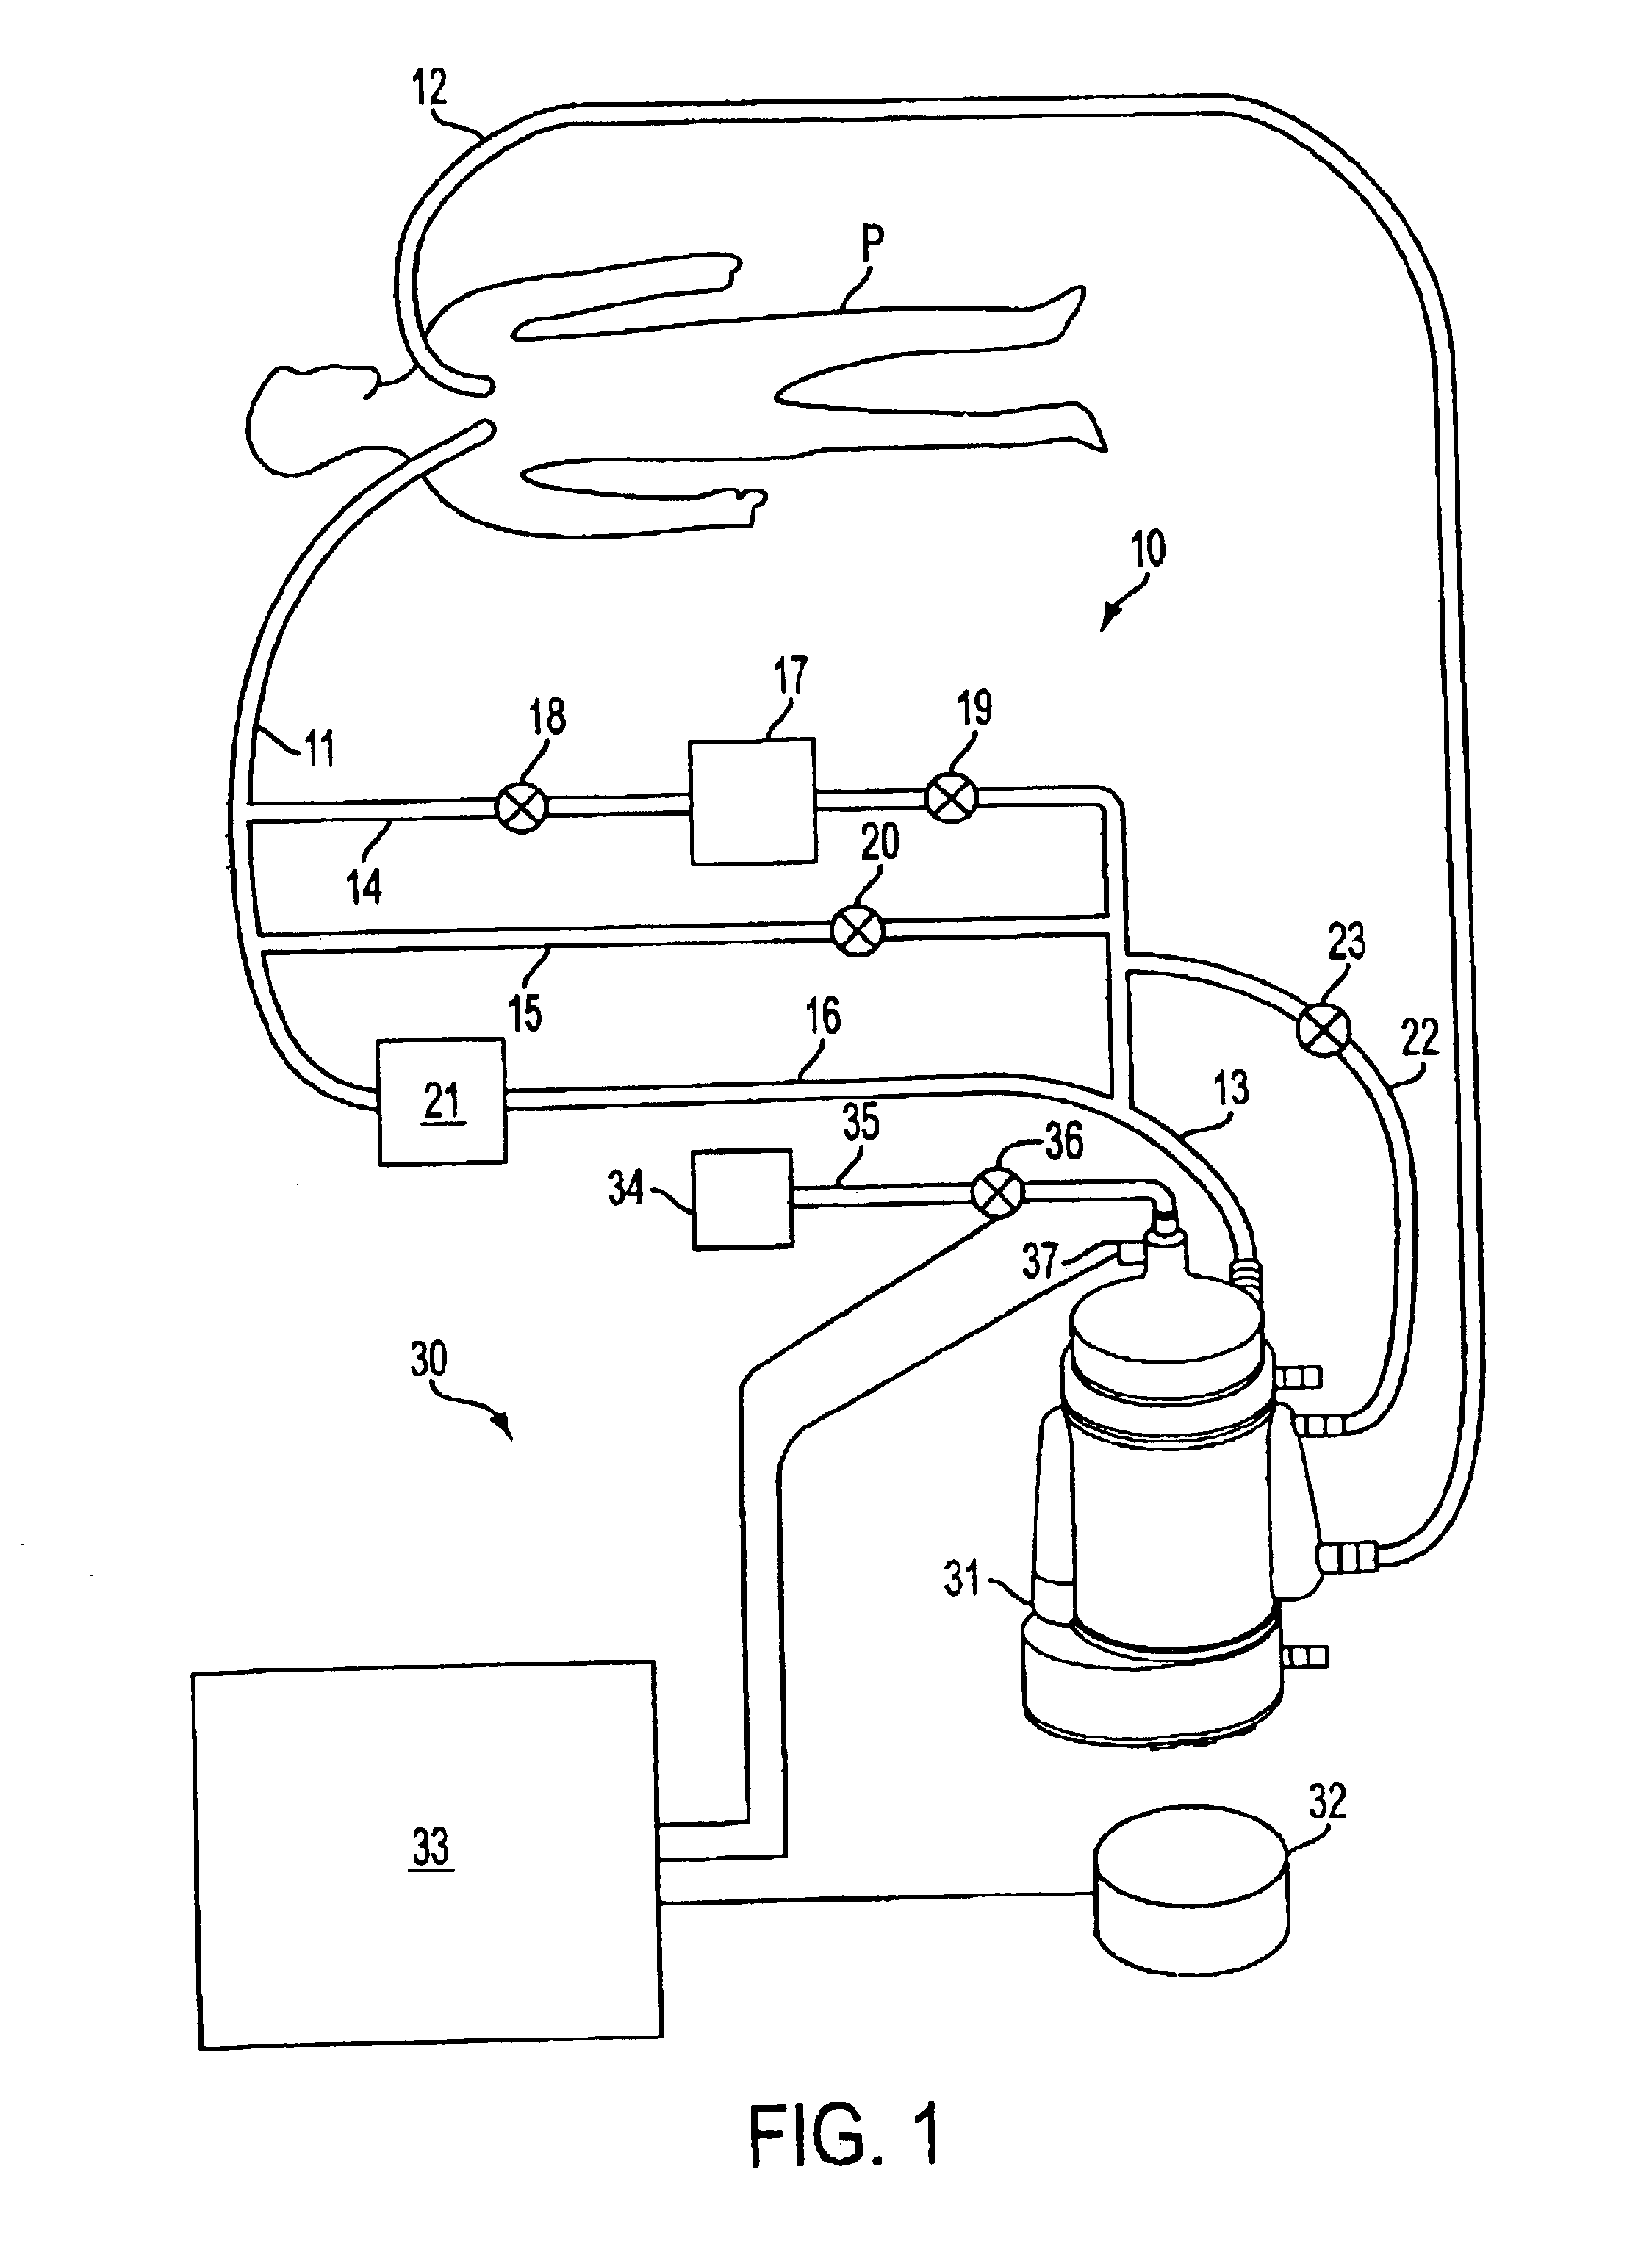 Integrated blood handling system having active gas removal system and methods of use